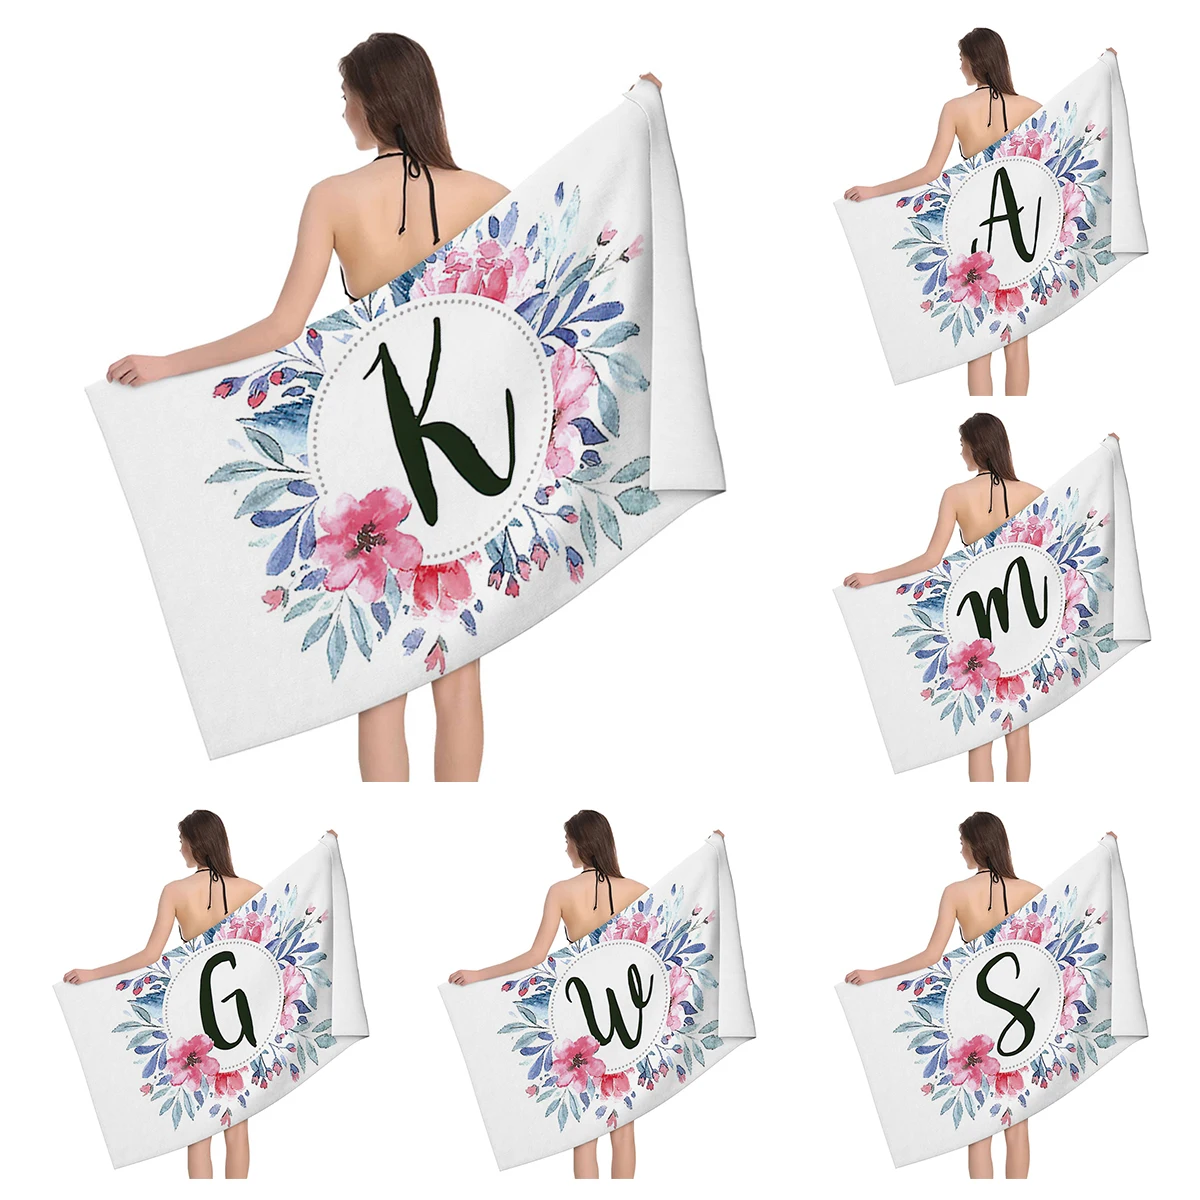 

Home bath towels for the body towels bathroom letters and flower quick drying microfiber beach towel man and women large sports